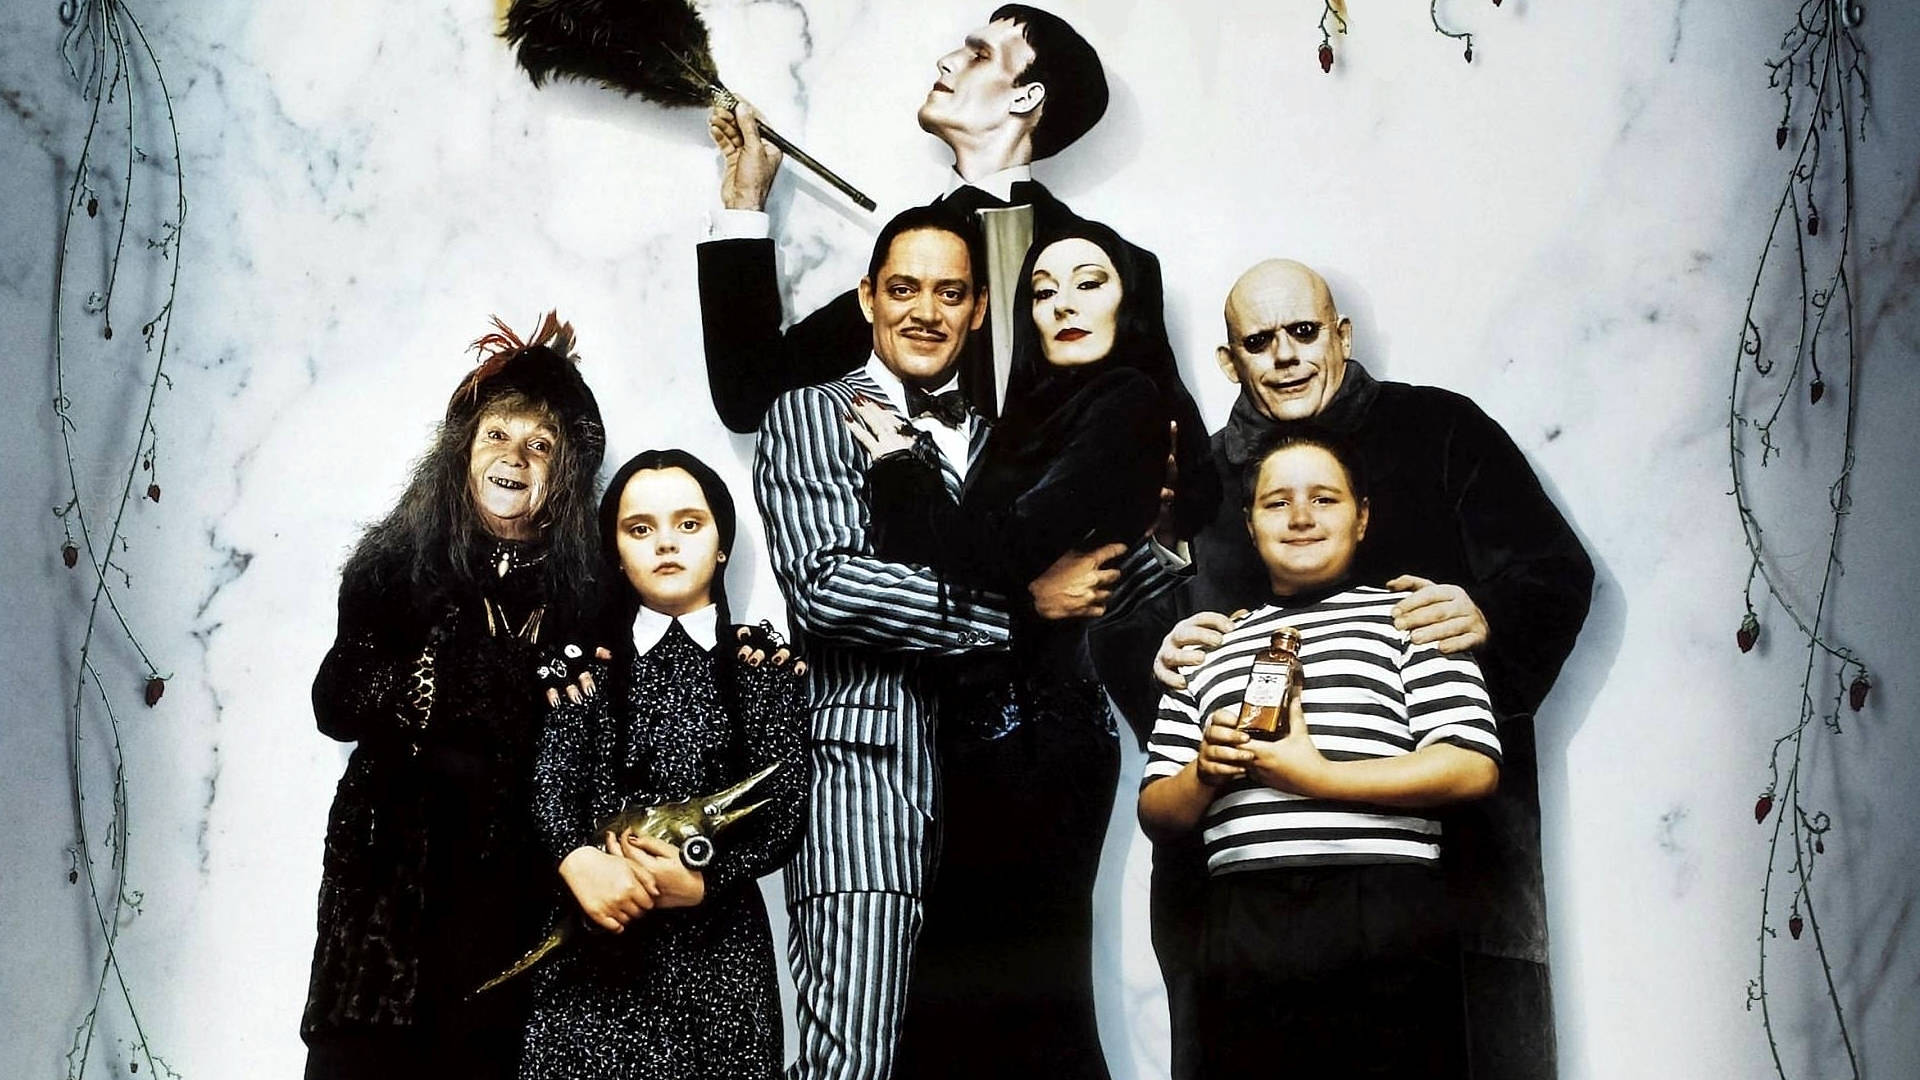 The Addams Family Portrait